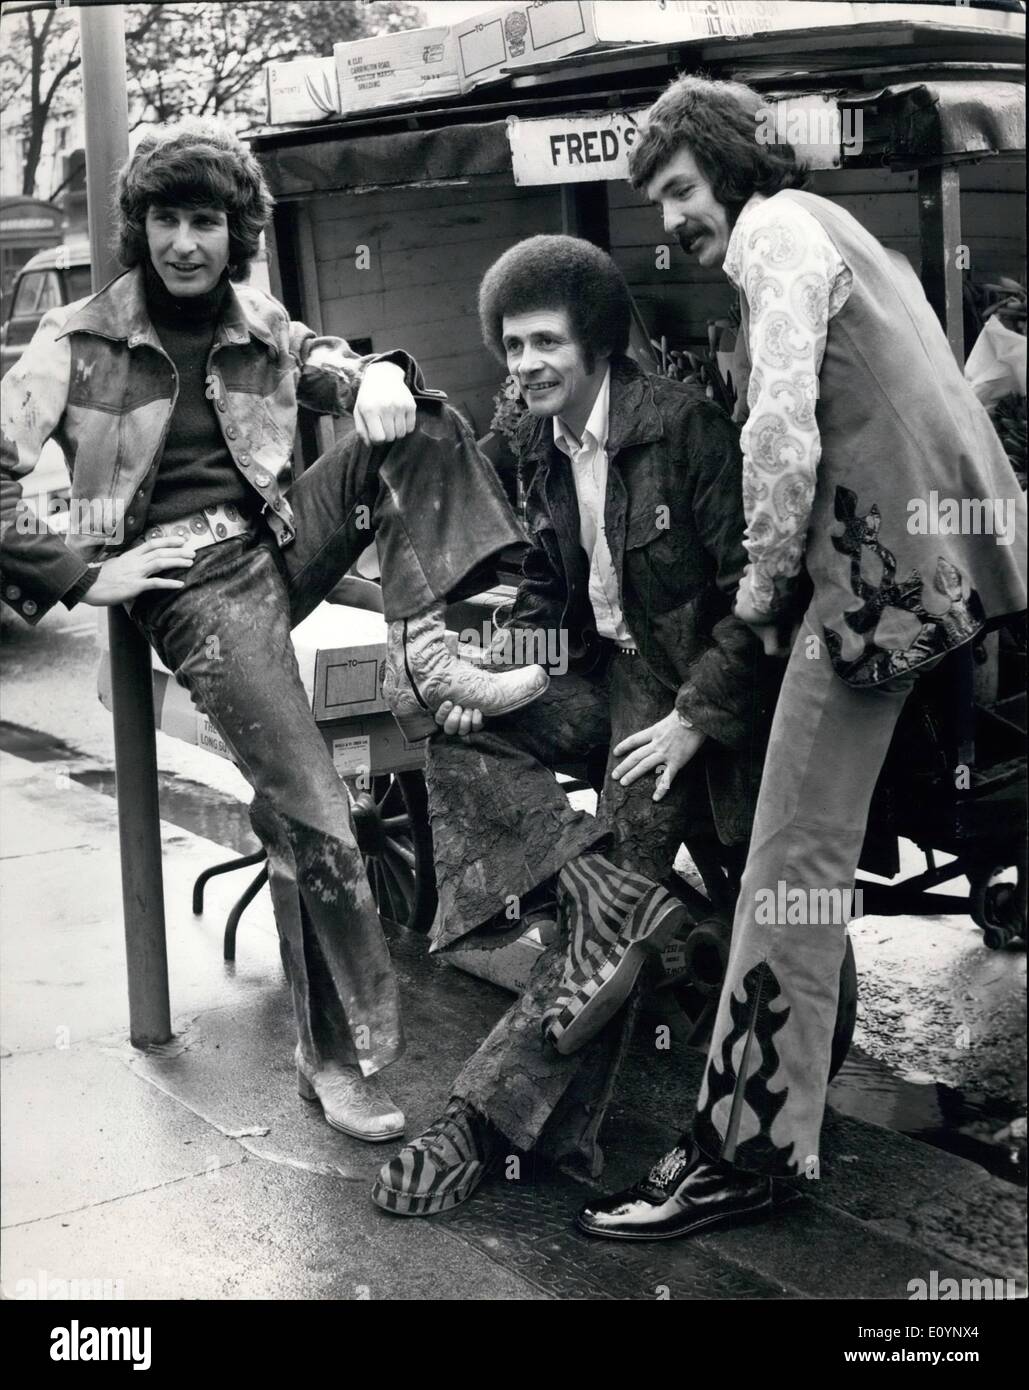 Jan. 01, 1971 - New World Pop Group. Try out the new topper shows. Group from Down Under : John Kane, John Lee and Mel Nochan the Popular Australian group were to be seen in King's Road, Chelsea today. trying out some of the new 1971 Ã¢â‚¬ËœTopper' shoe styles. There are many bold new designs including smart zebra skin cork and leather wedges and a new super shoe with Cuban heel which won a major design award in Italy. The shoes include a range of traditionally styled designs which would not disgrace the stock Exchange Stock Photo